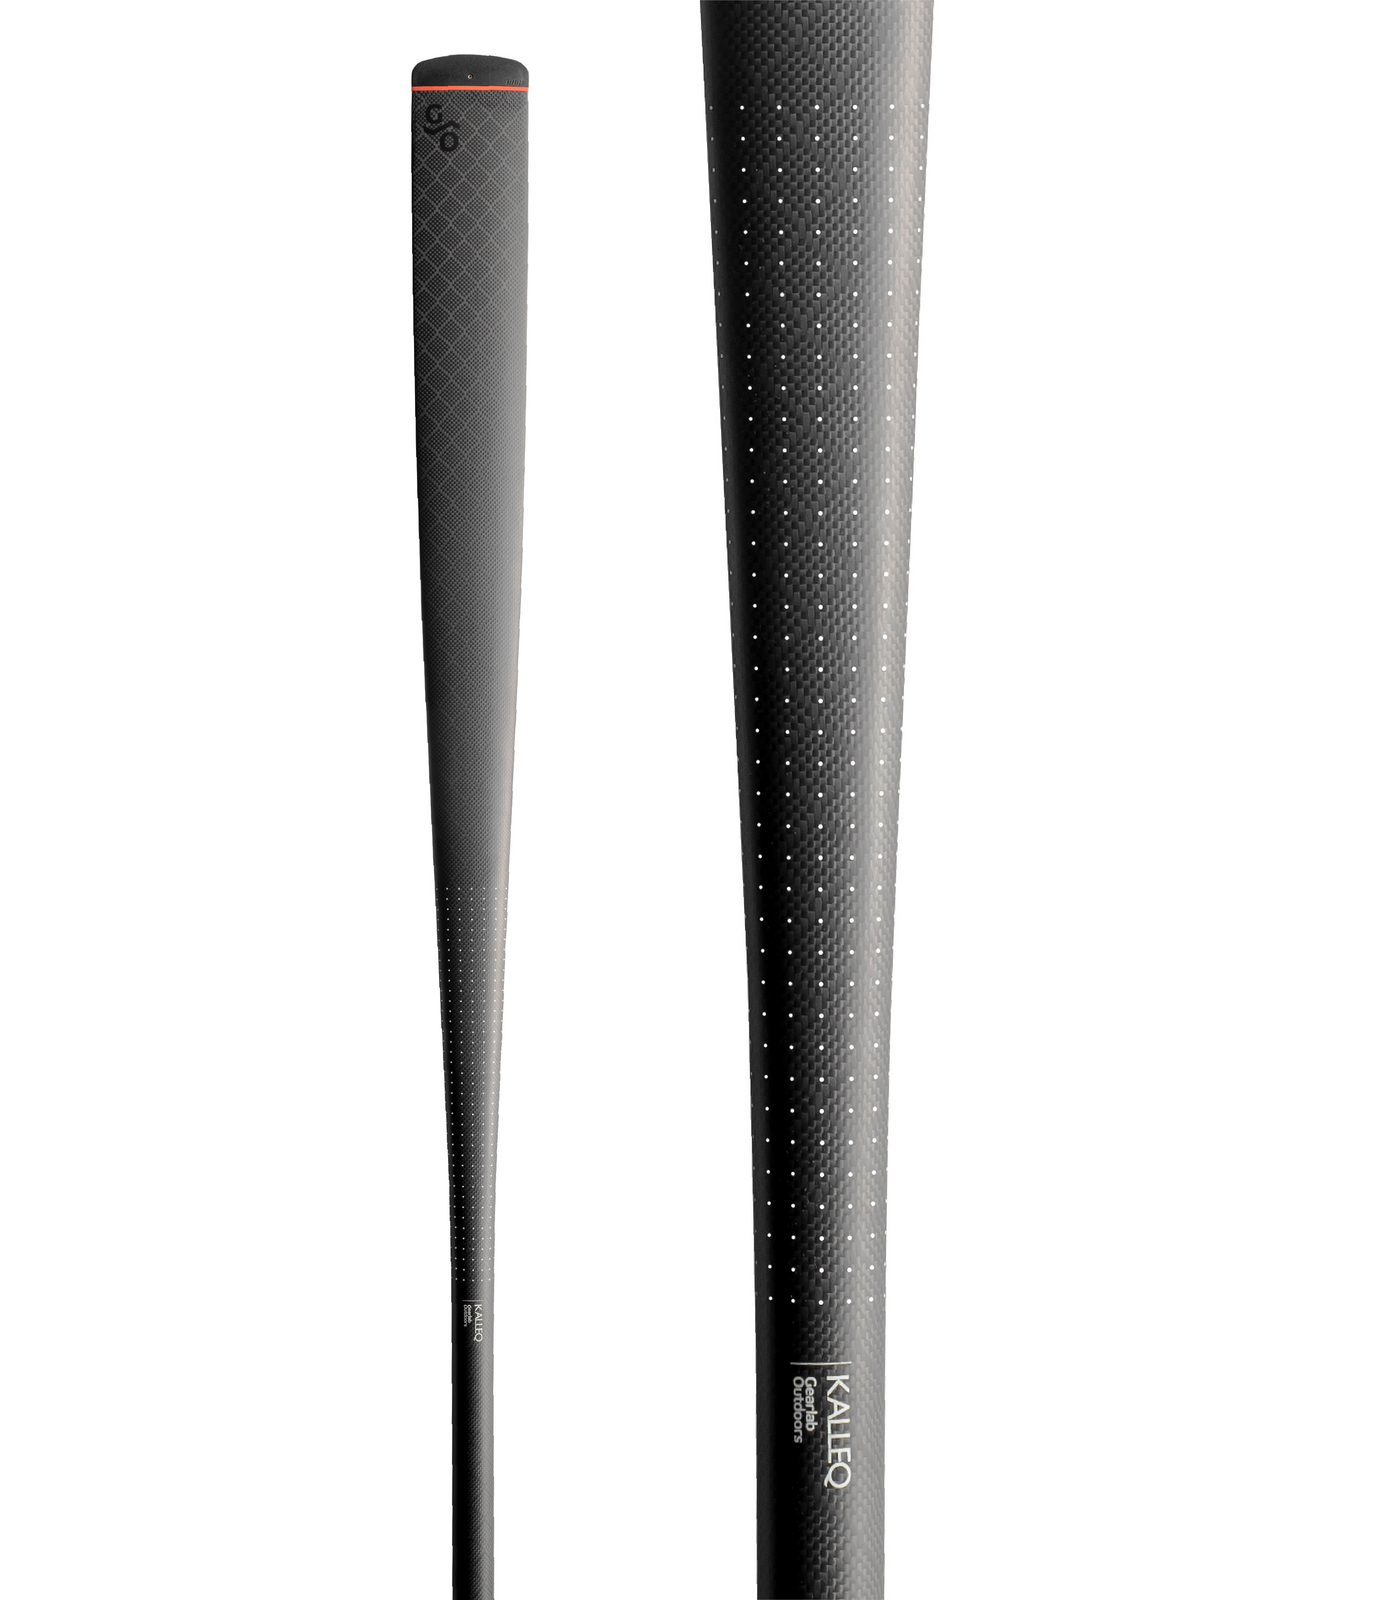 Gearlab Outdoors Kalleq Greenland Carbon Paddle